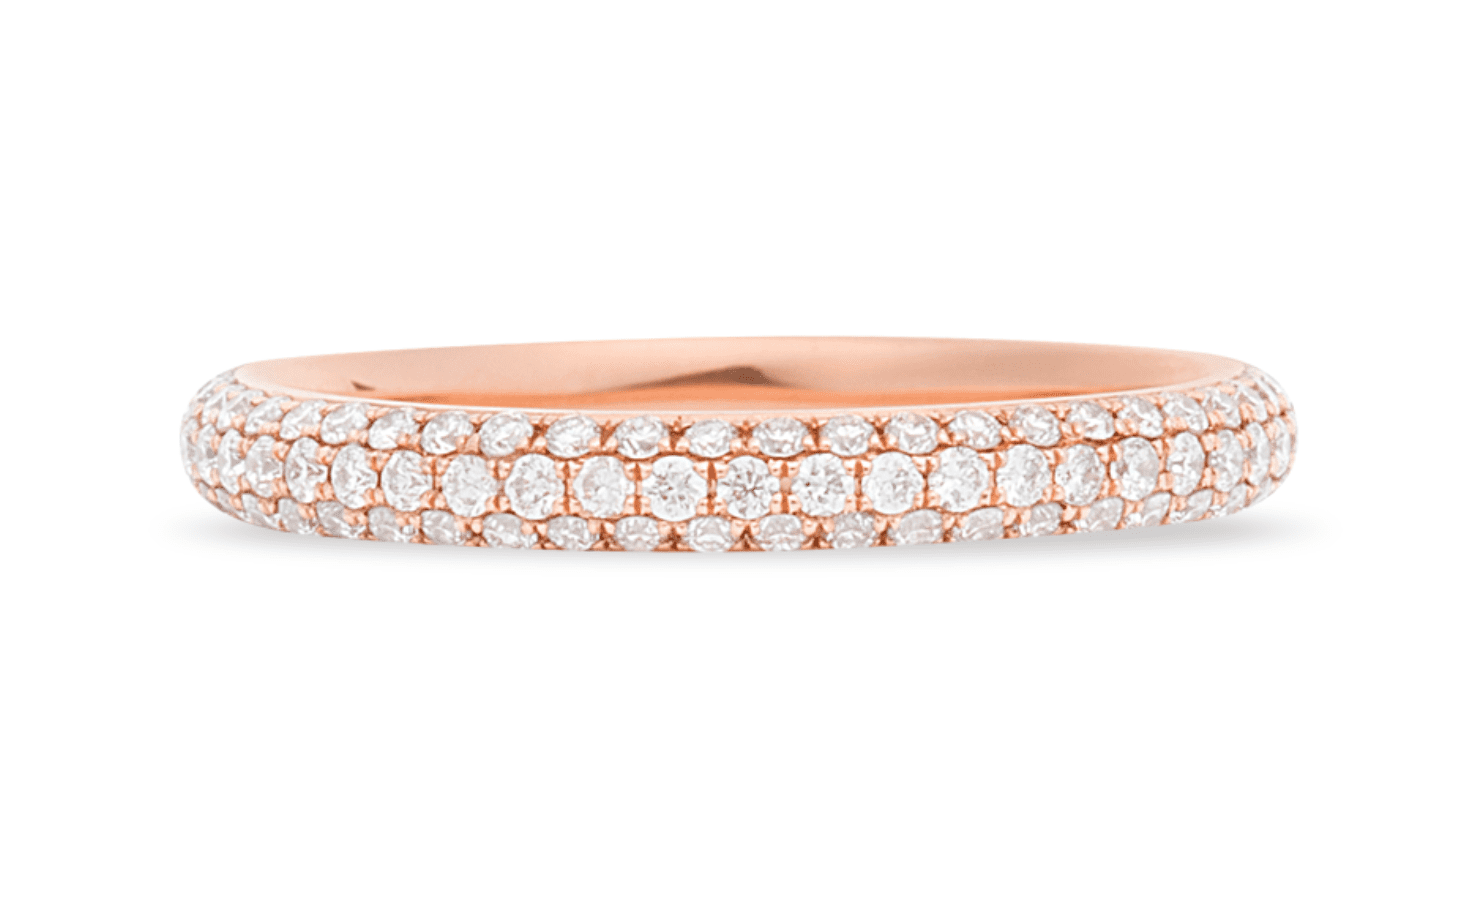 Diamond Eternity Band from King Jewelers